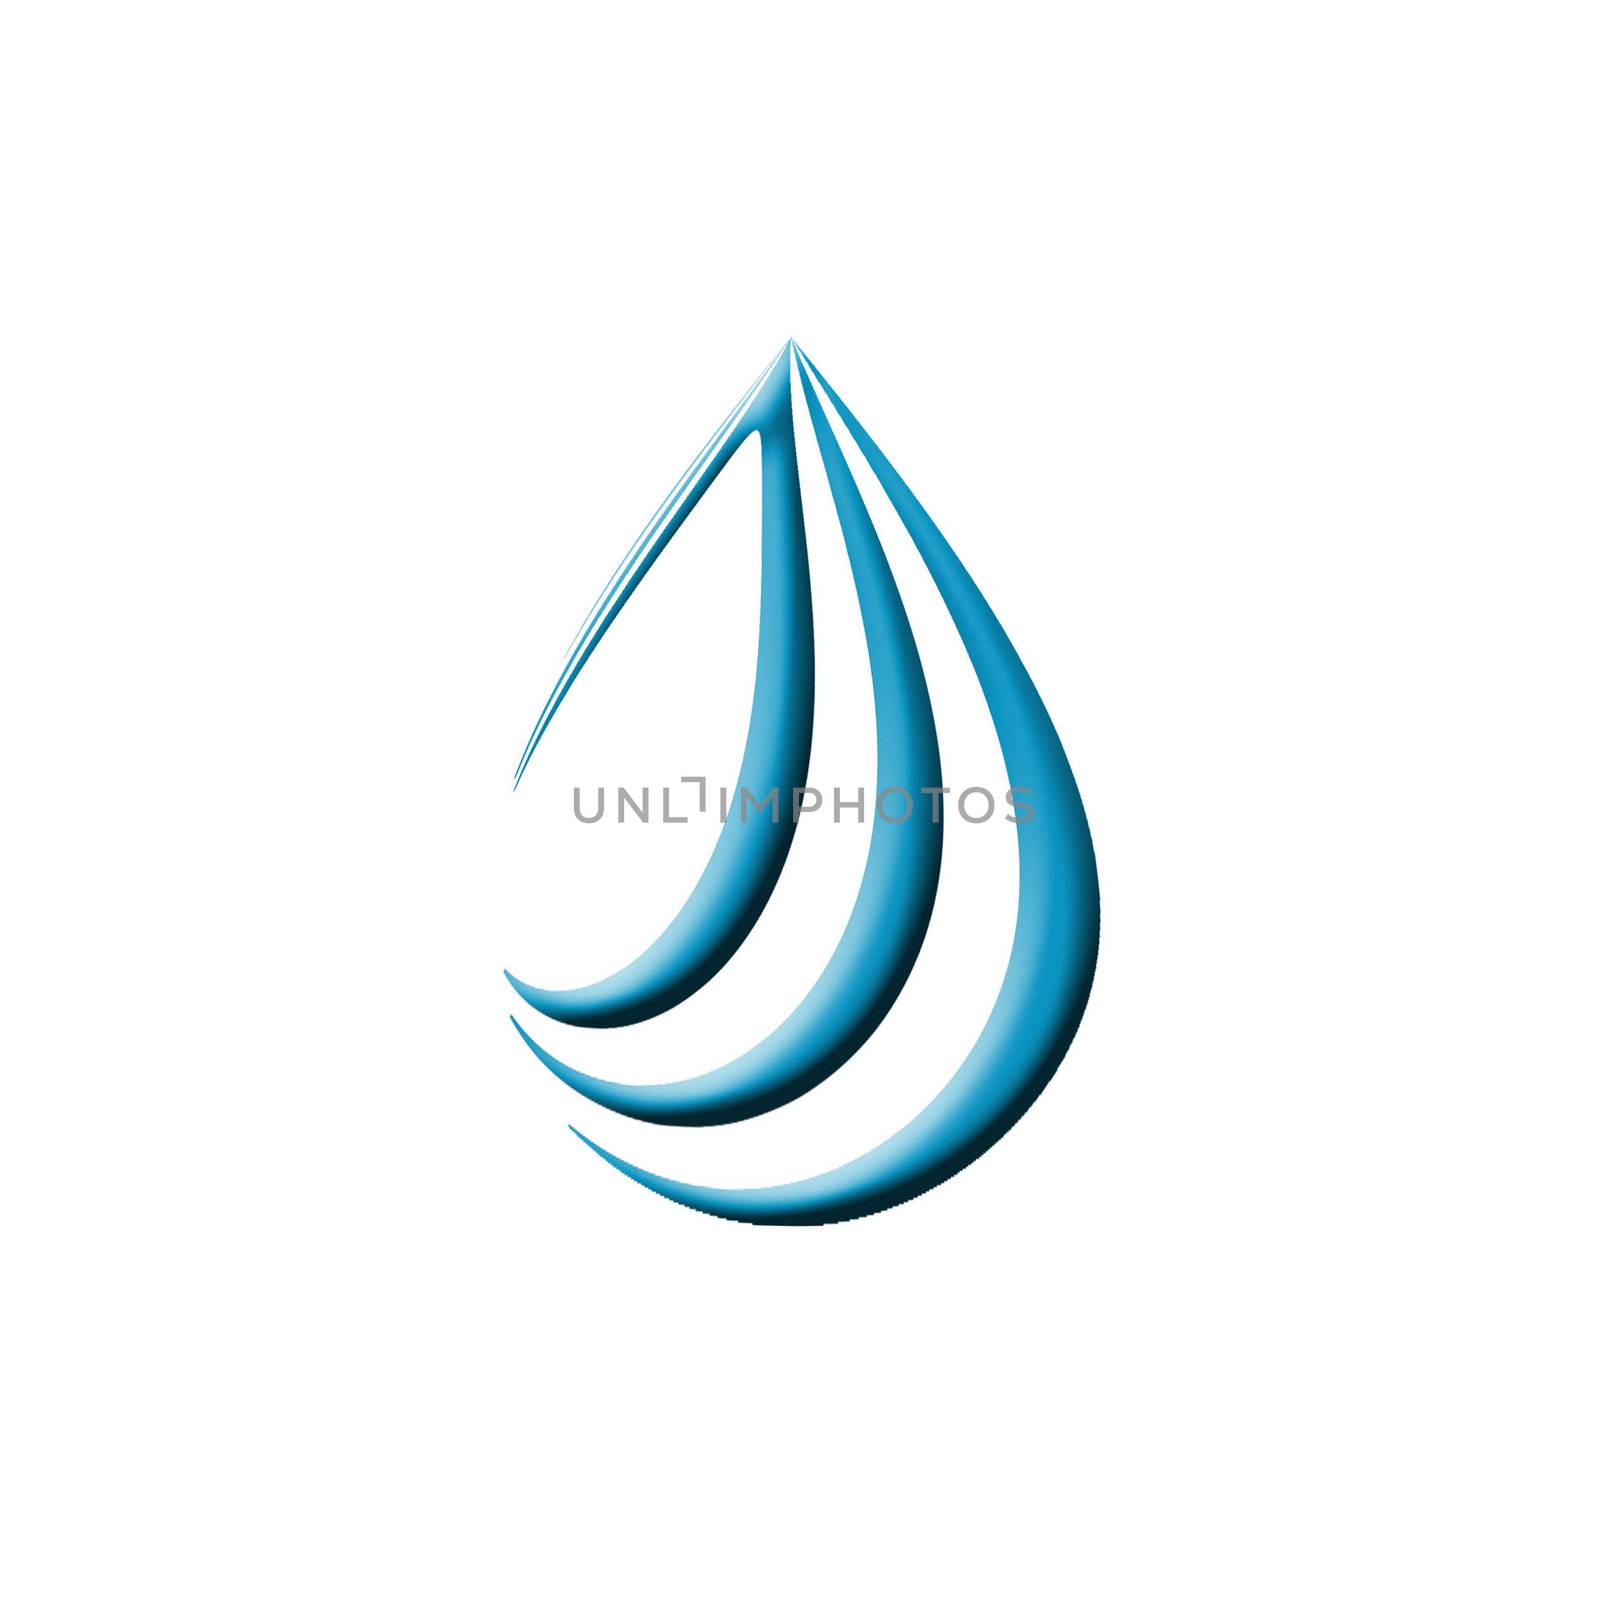 Mineral water logo